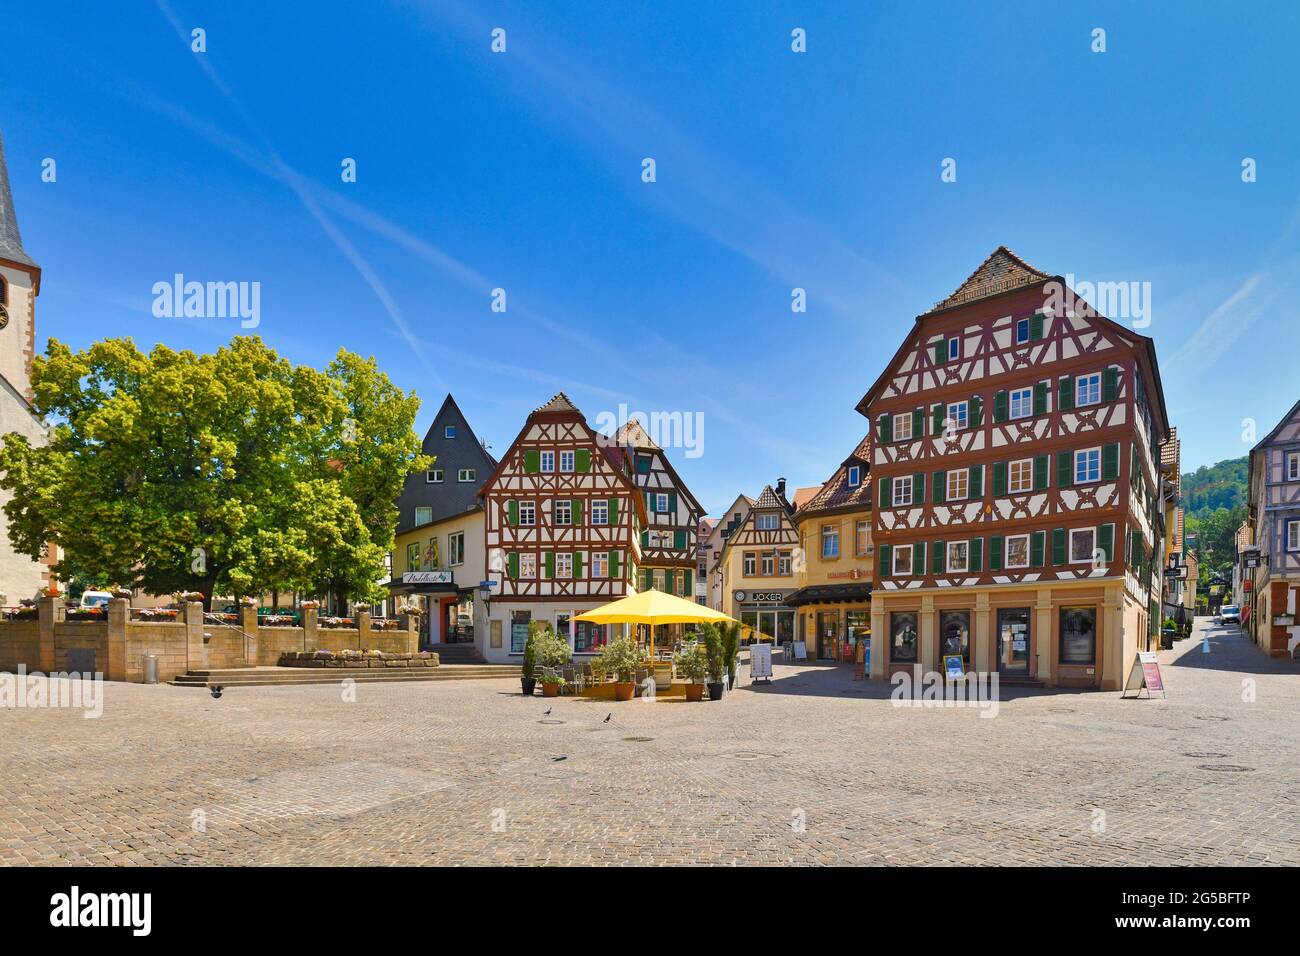 Mosbach, Germany - June 2021: Market place with beautiful historic timber-framed houses on sunny day Stock Photo